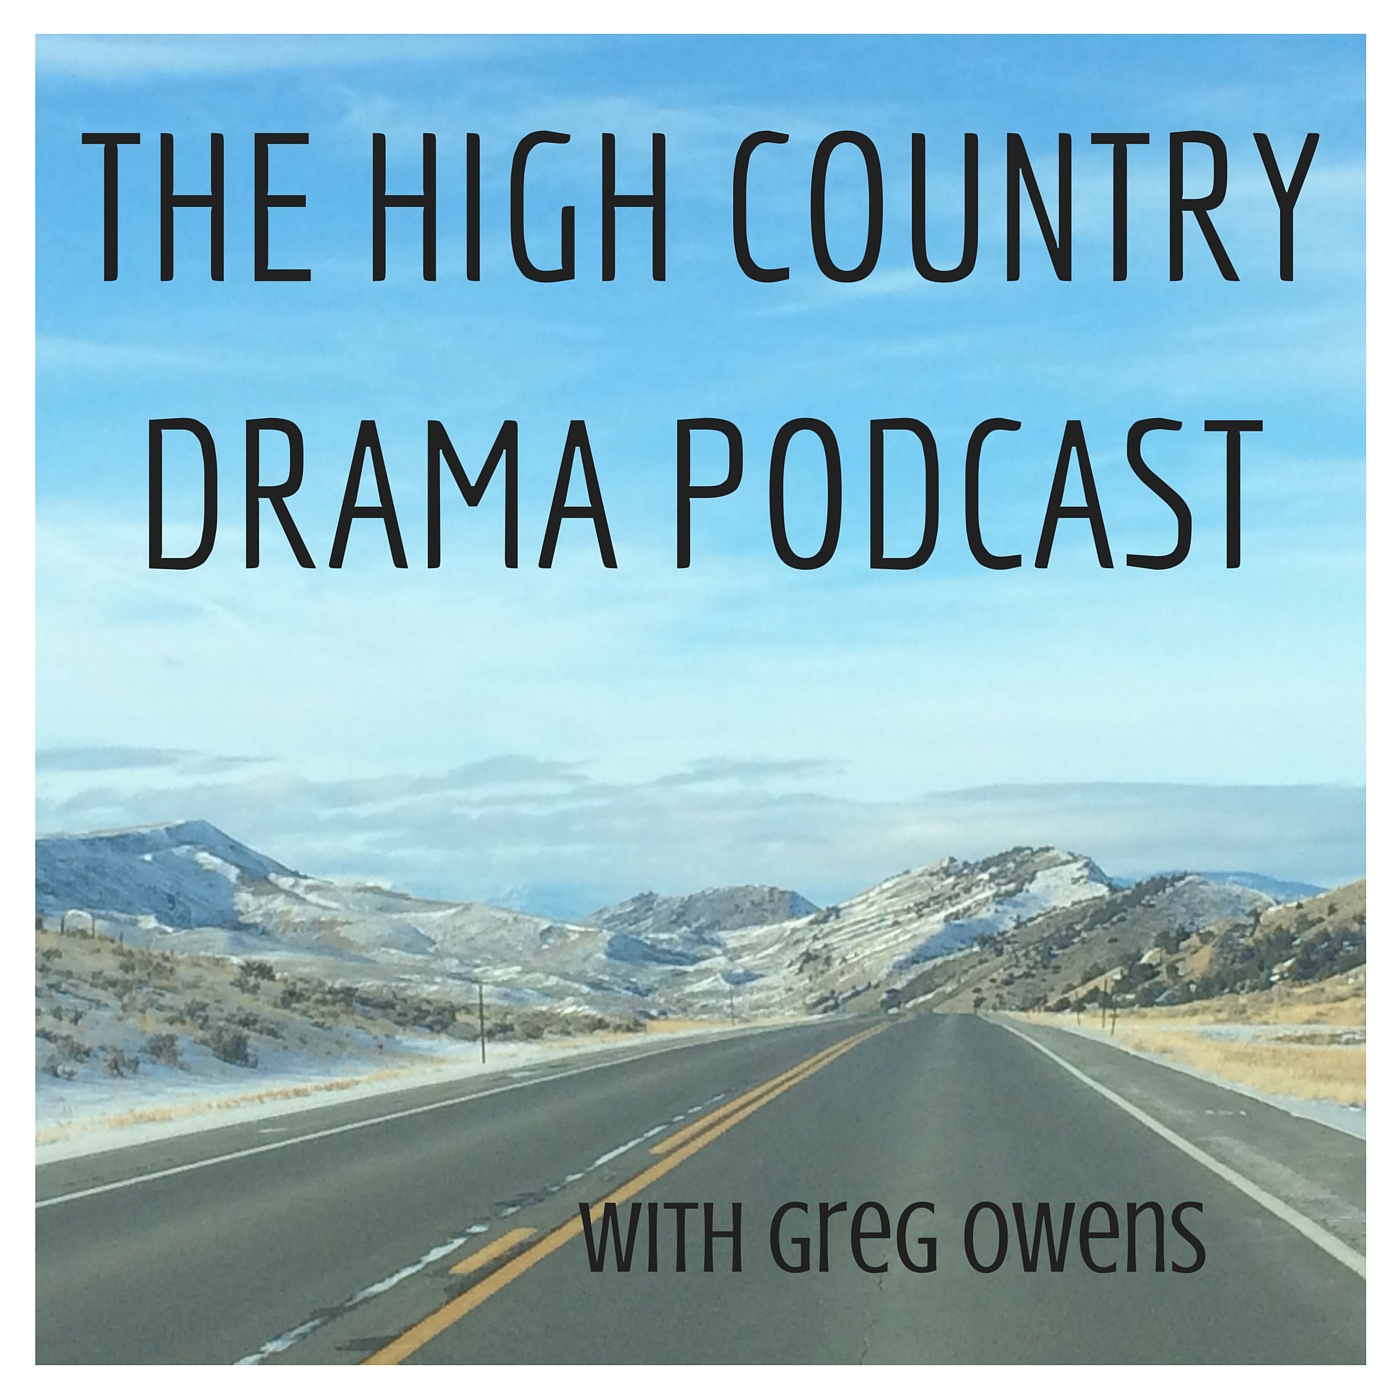 High Country Drama Podcast - Greg Owens